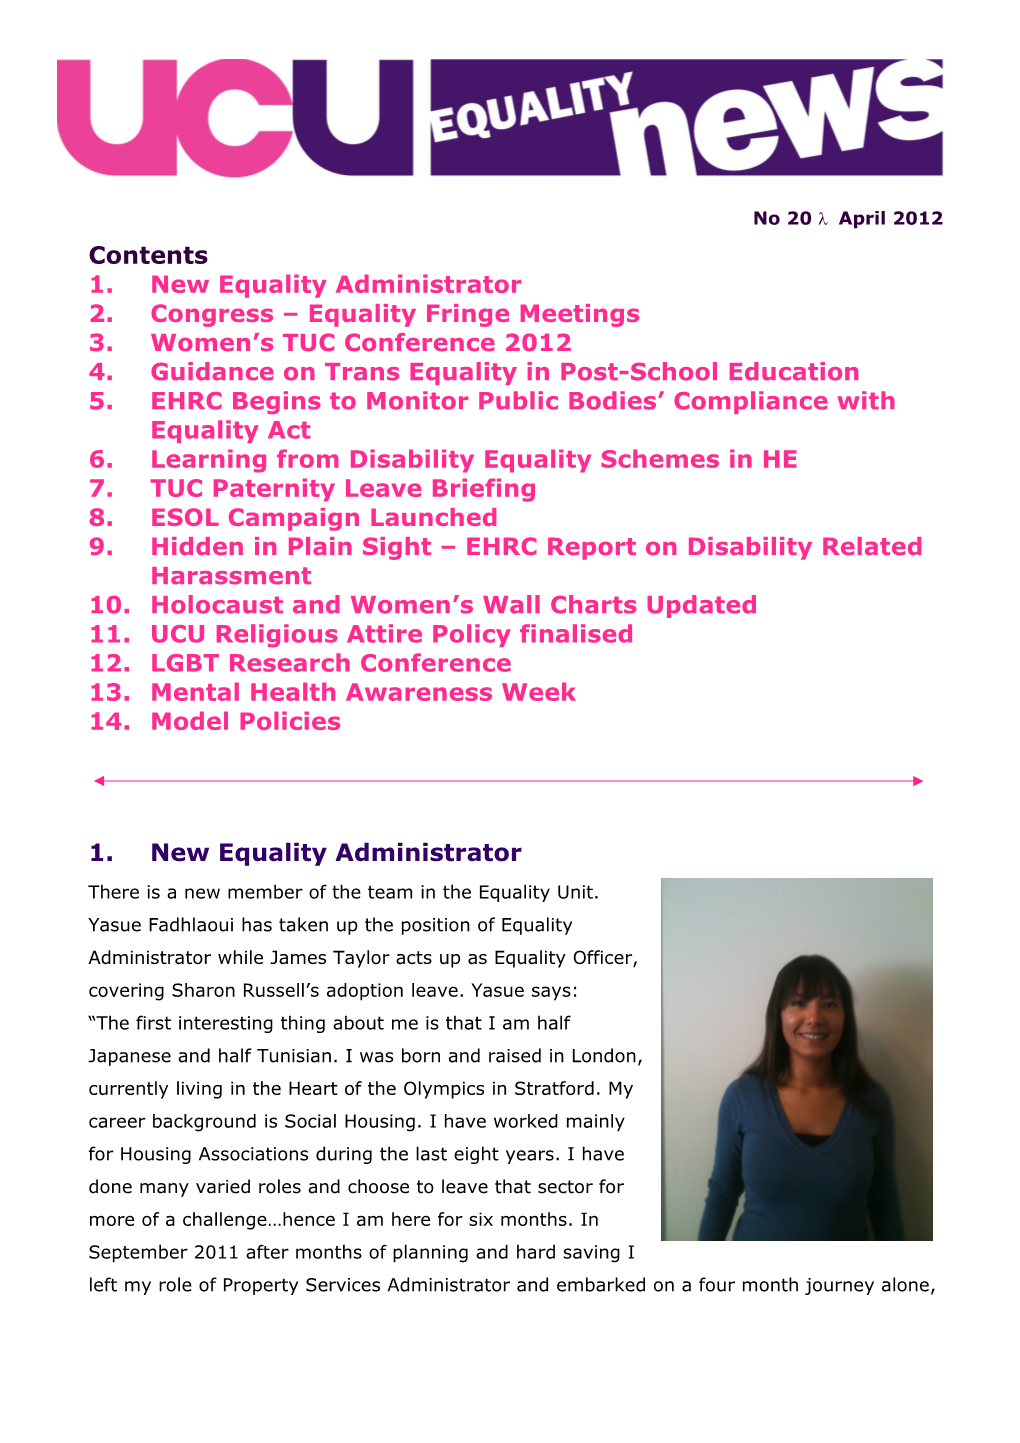 2.Congress Equality Fringe Meetings